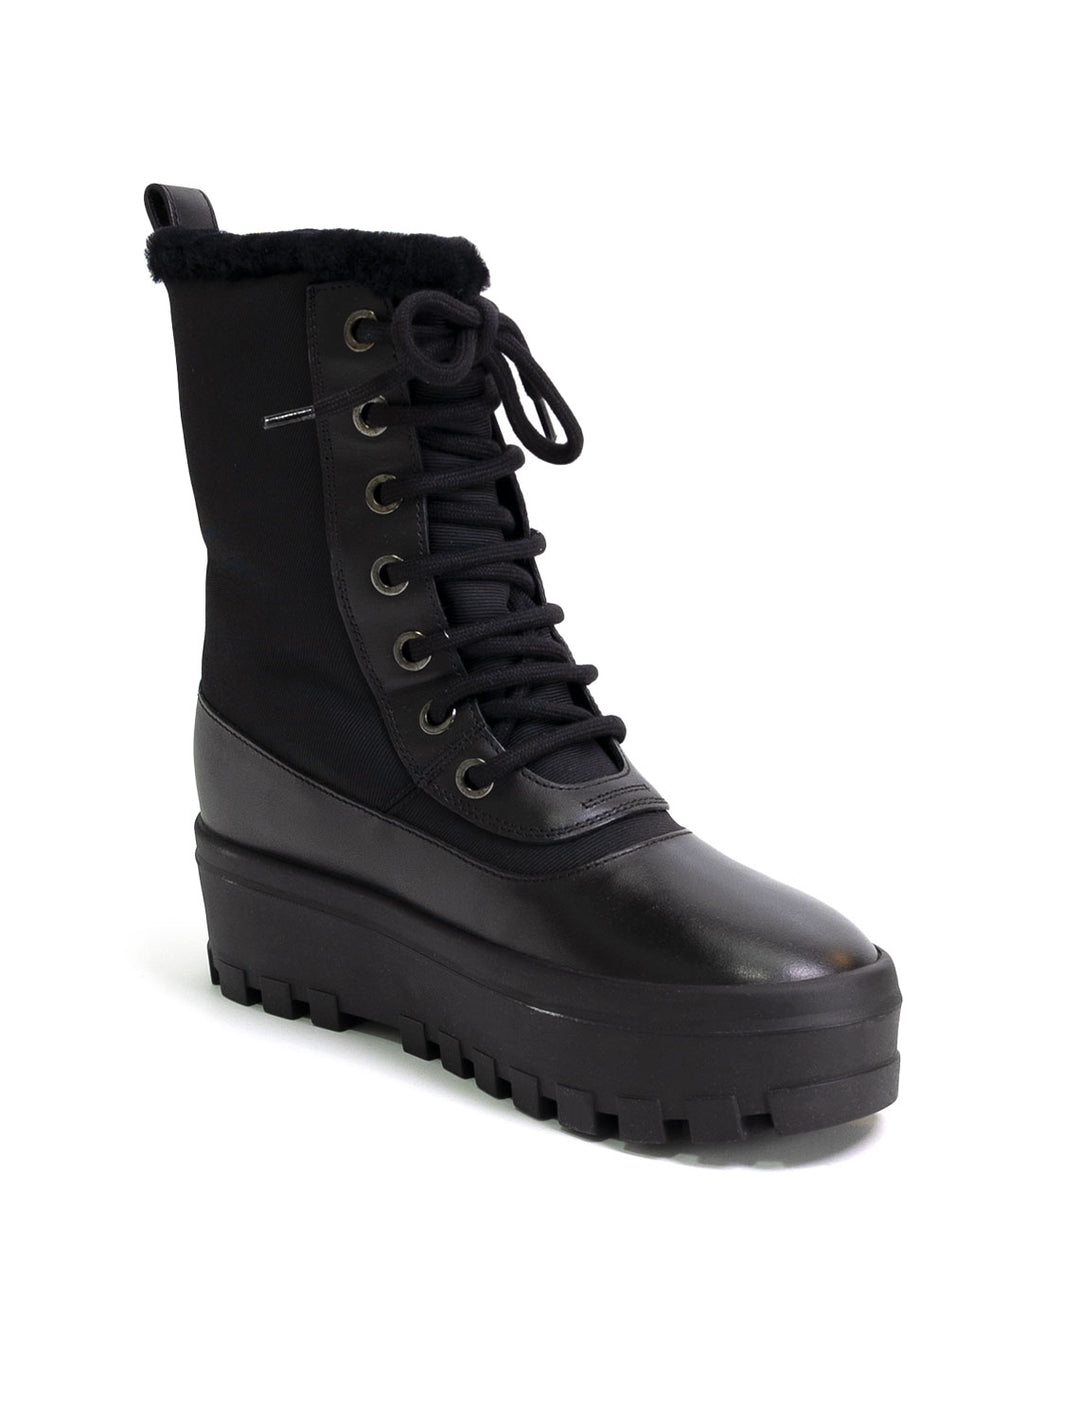 Front angle view of Mackage's hero boots in black.